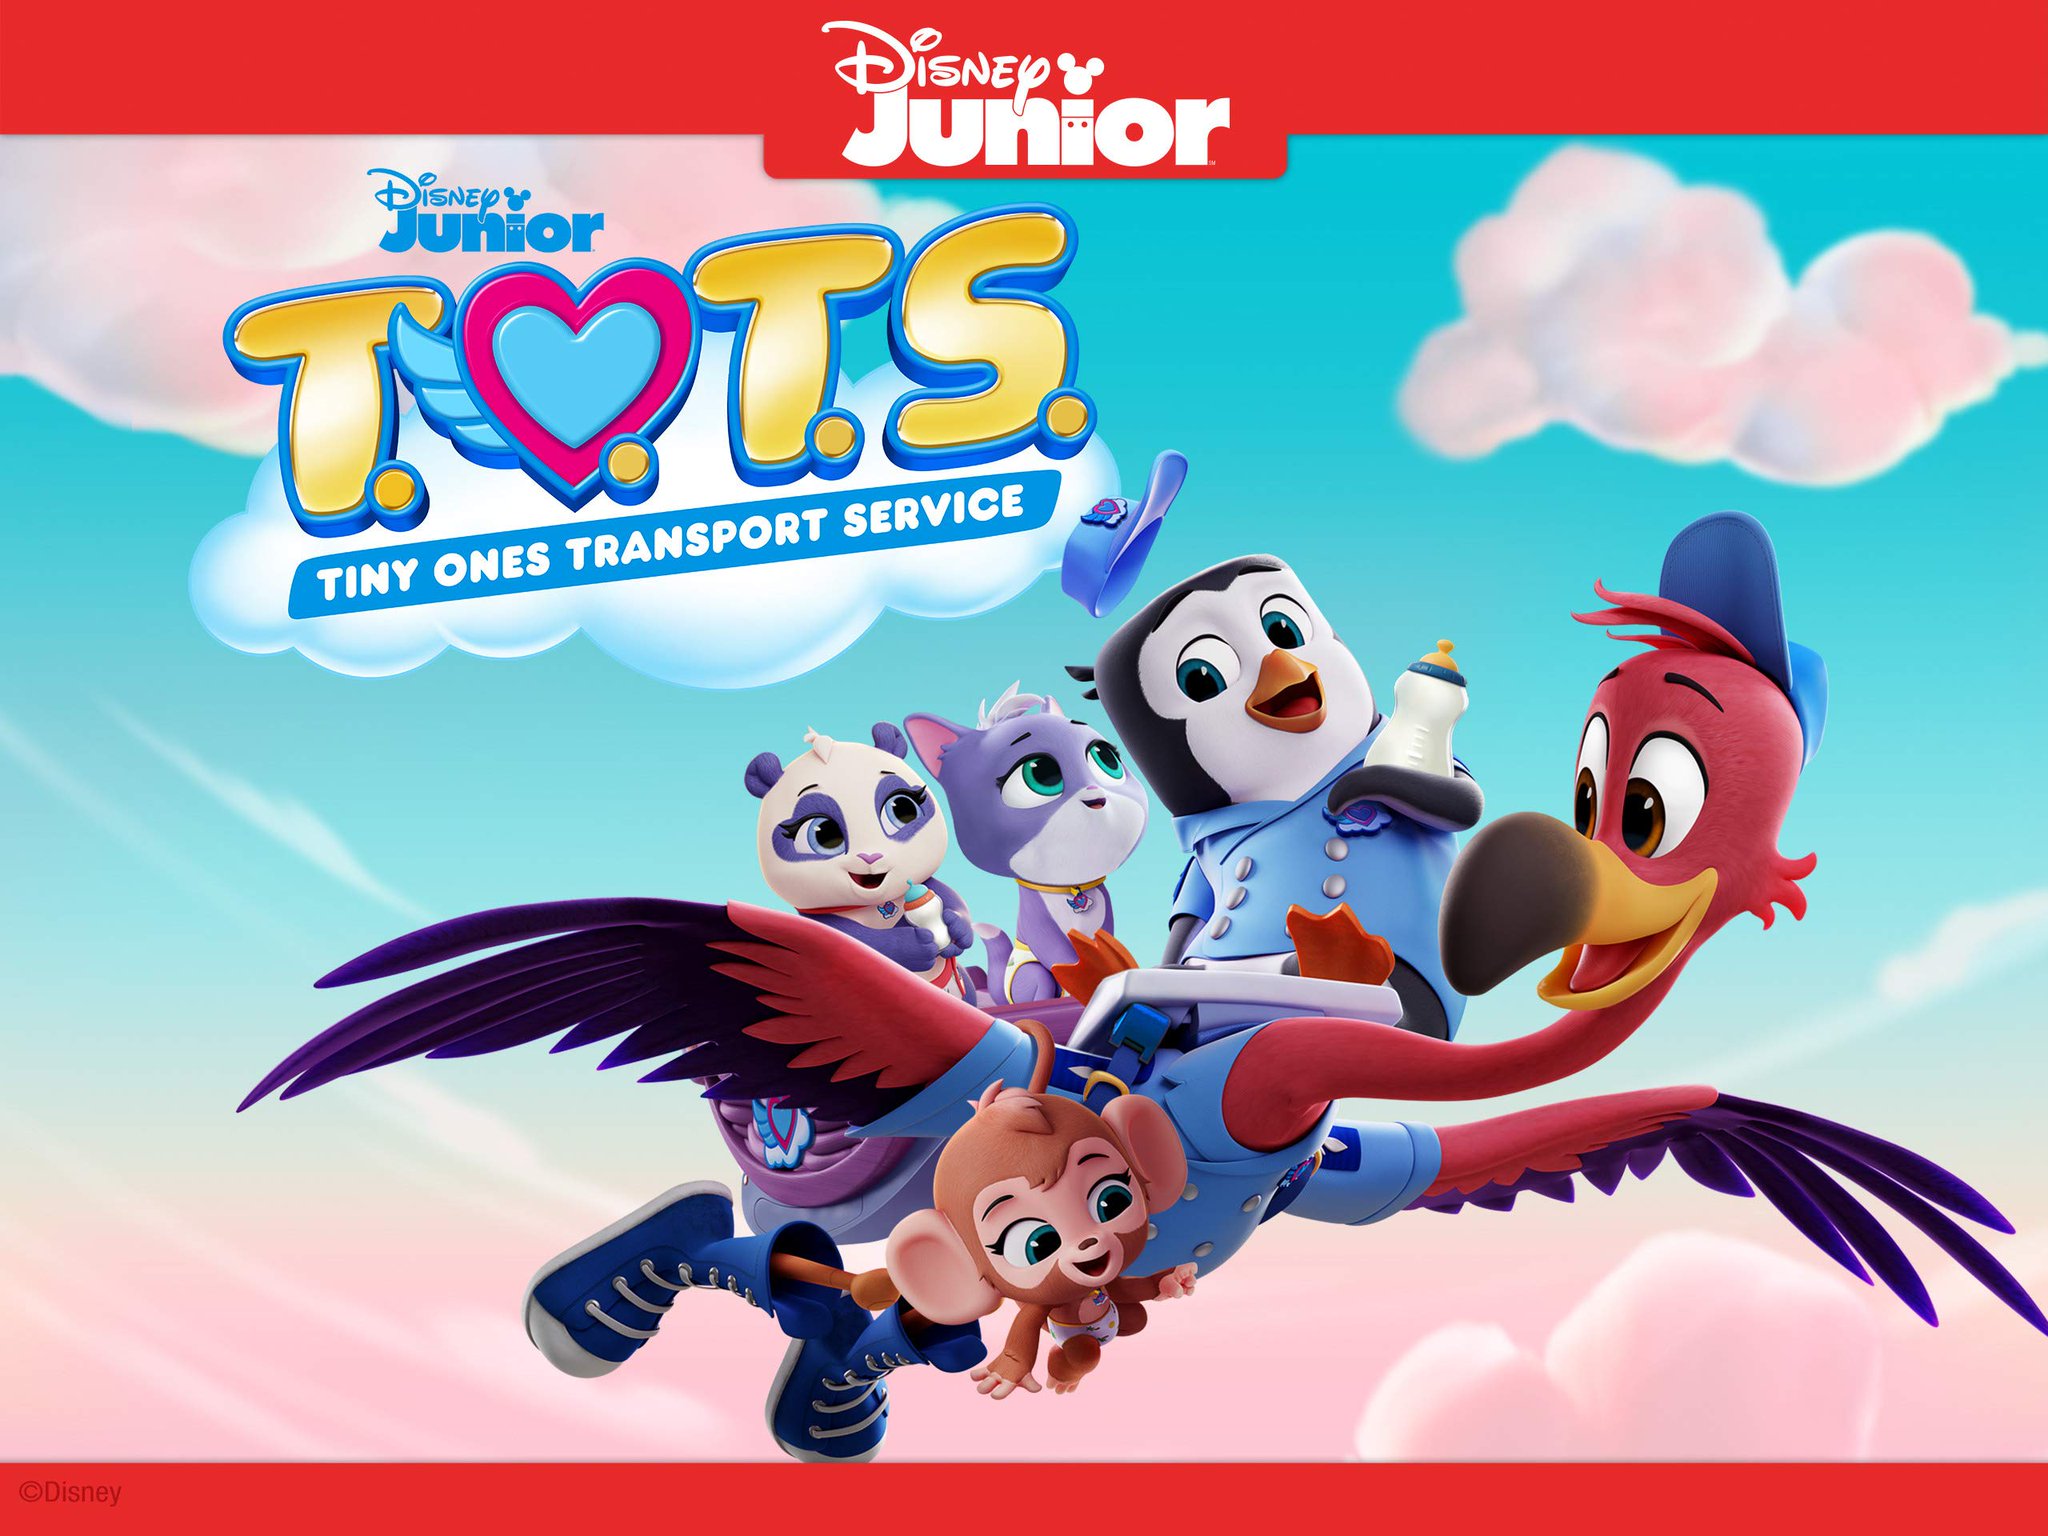 Disney Schedule Archive en Twitter: Season 2 of T.O.T.S. premieres Friday, August 7 at 9 AM on Disney Channel, and Saturday, August 8 at 10:20 AM on Disney Junior and DisneyNOW